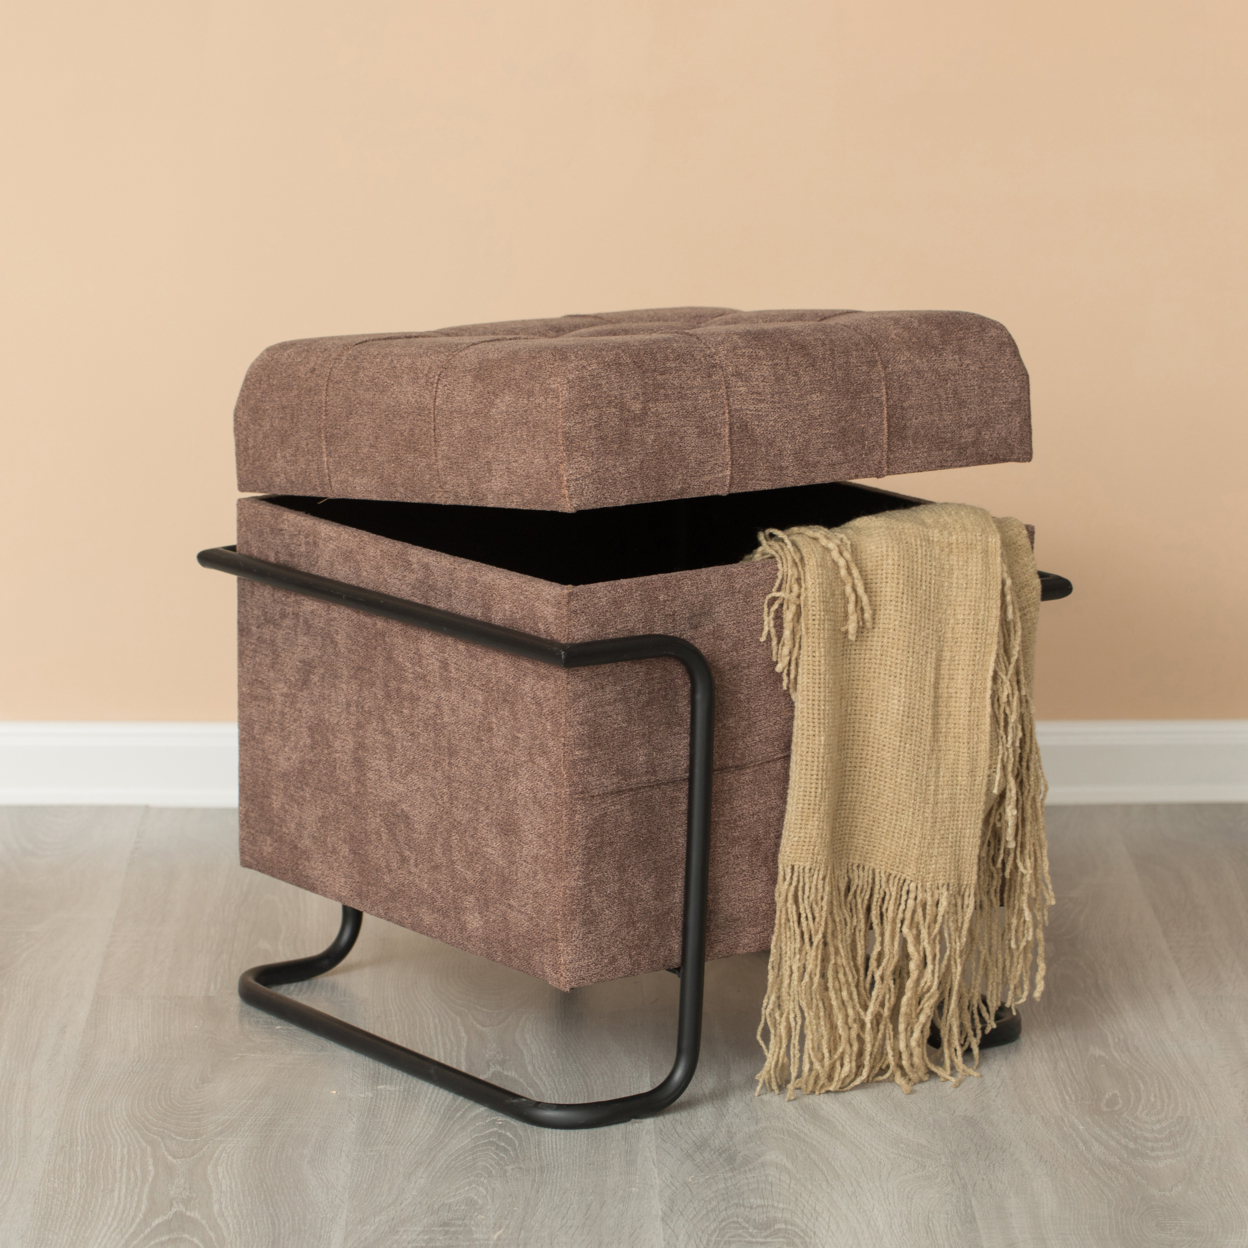 Square Fabric Storage Ottoman With Black Metal Frame - Brown